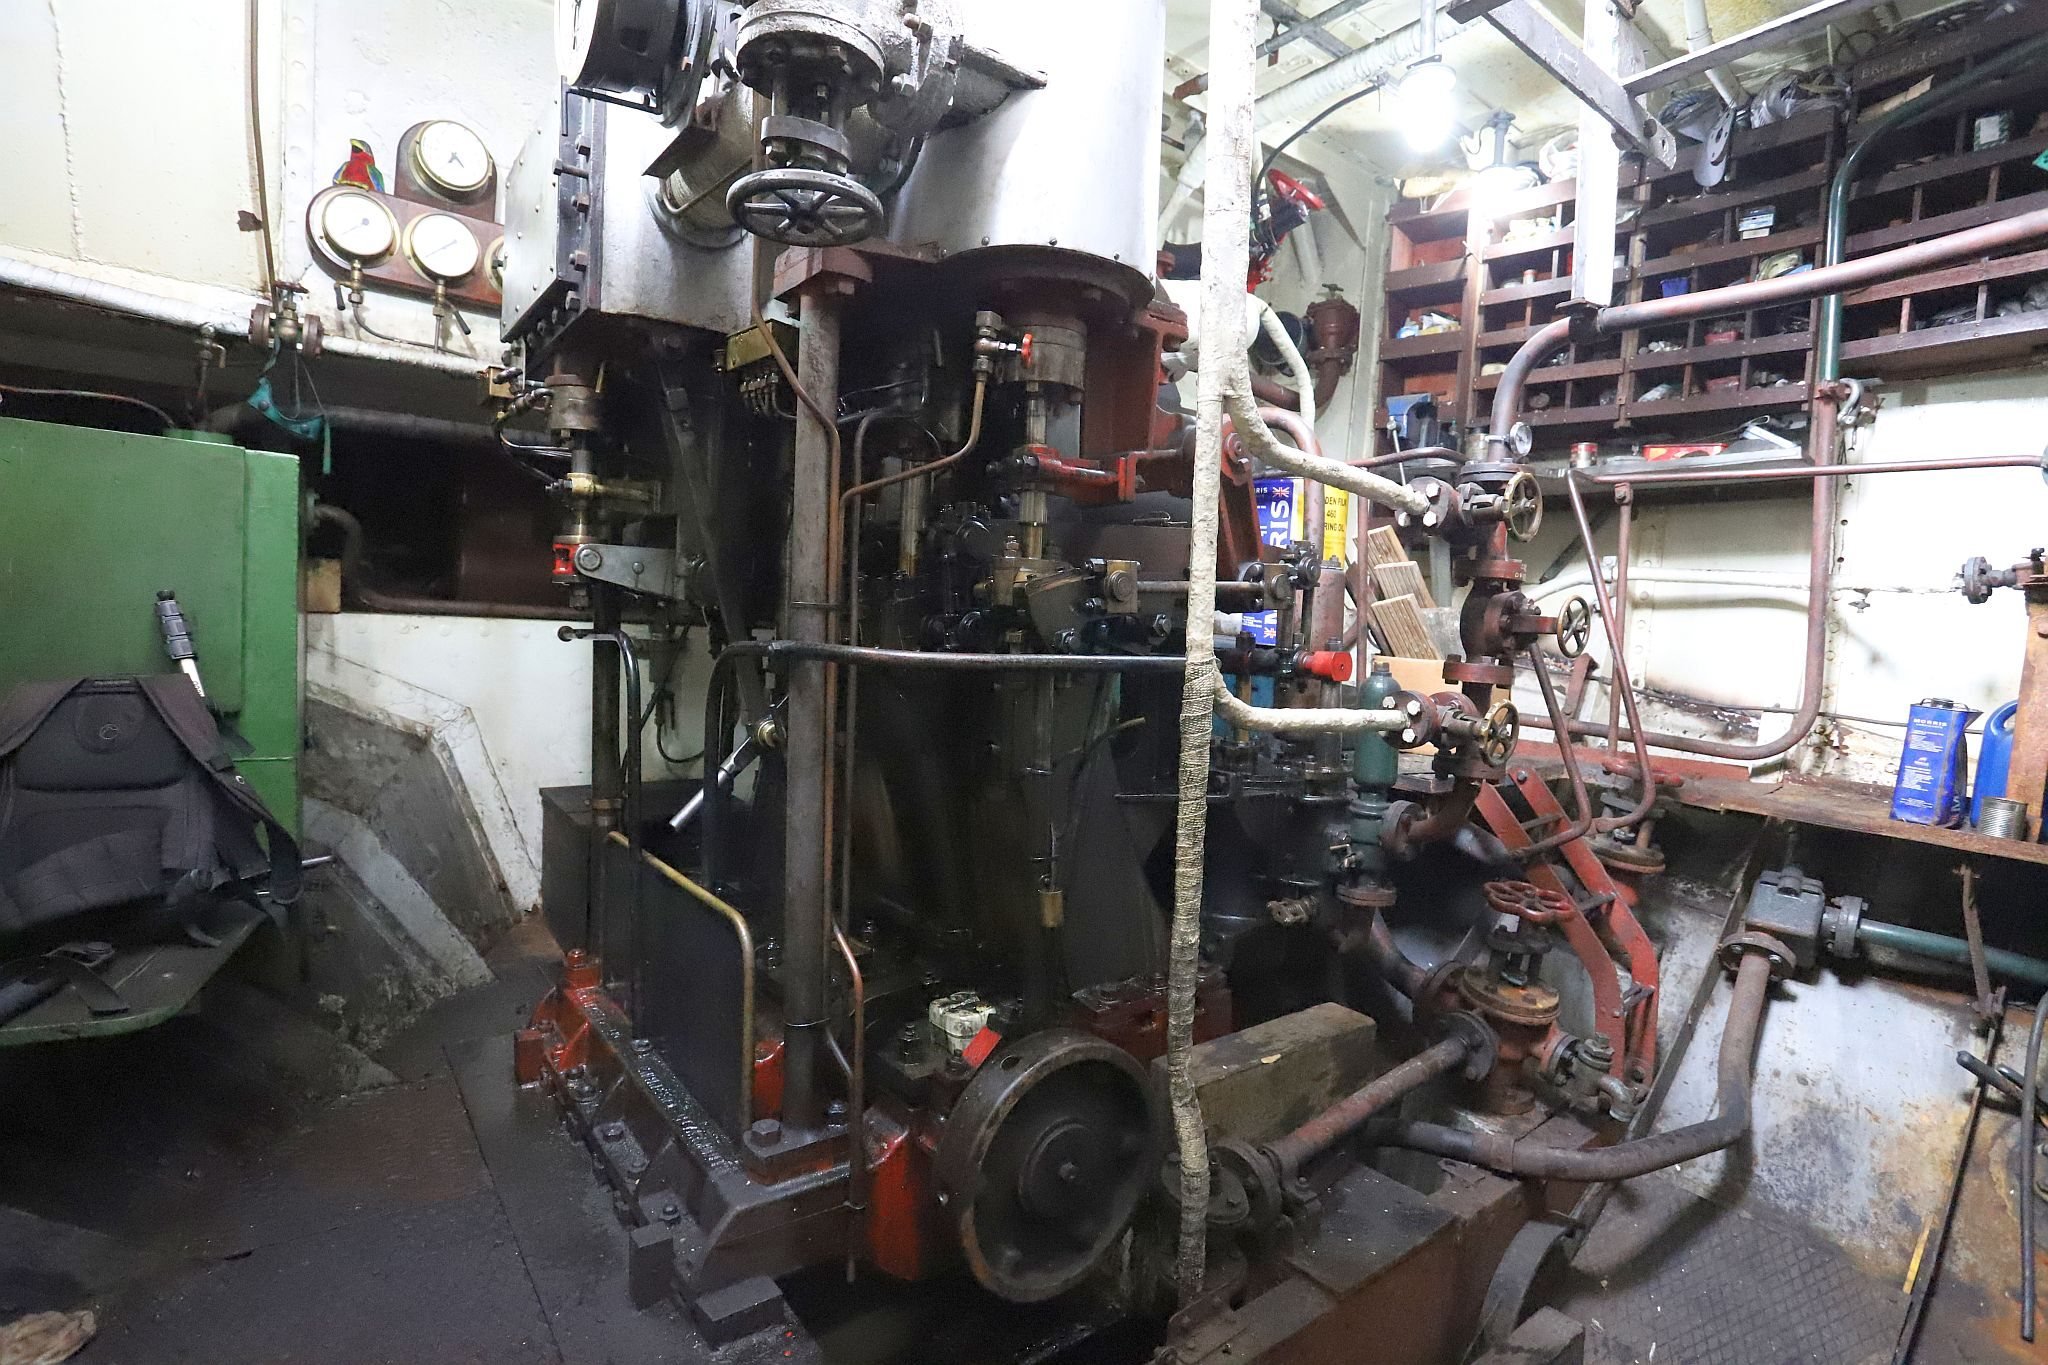 Steam engine in VIC 96's engine room. Steam powered ship VIC 96 visited central London in June 2023.